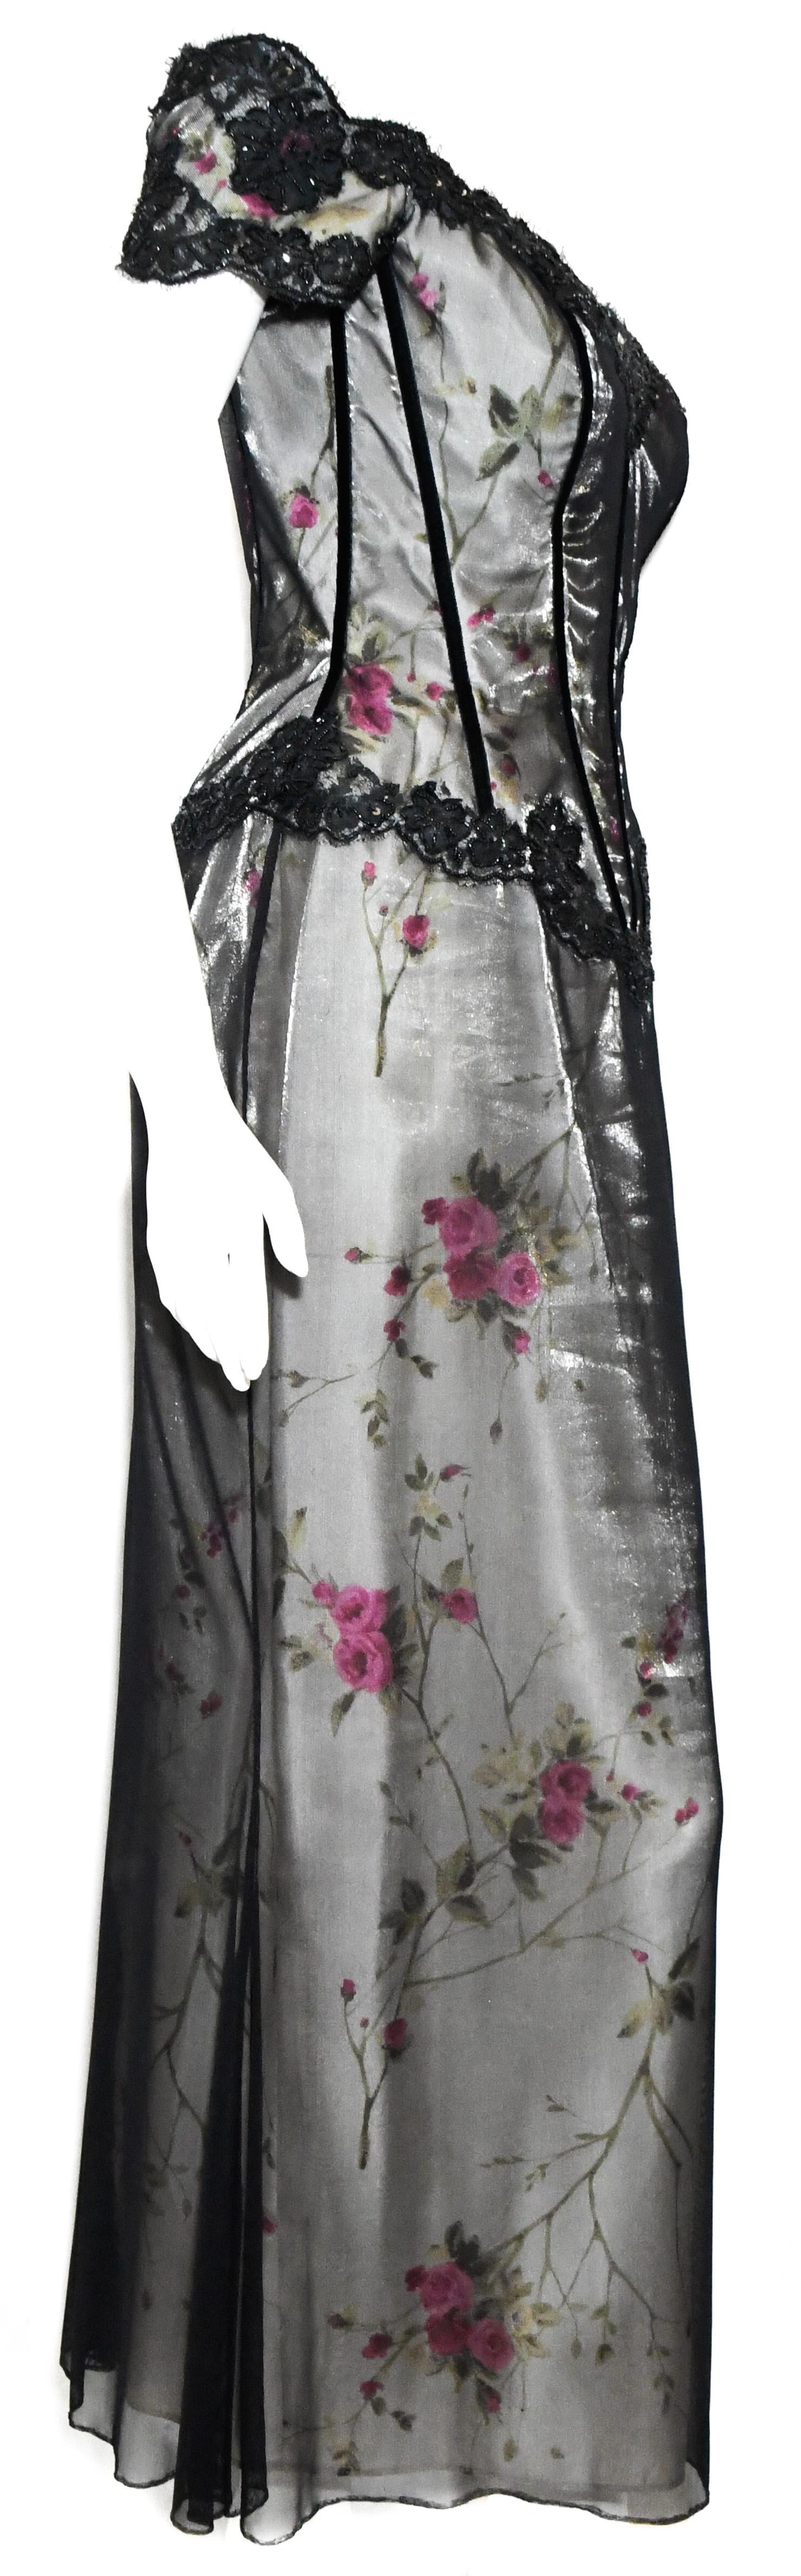 Women's Vicky Tiel Floral Print Gown With Black Tulle Overlay & Lace Trim